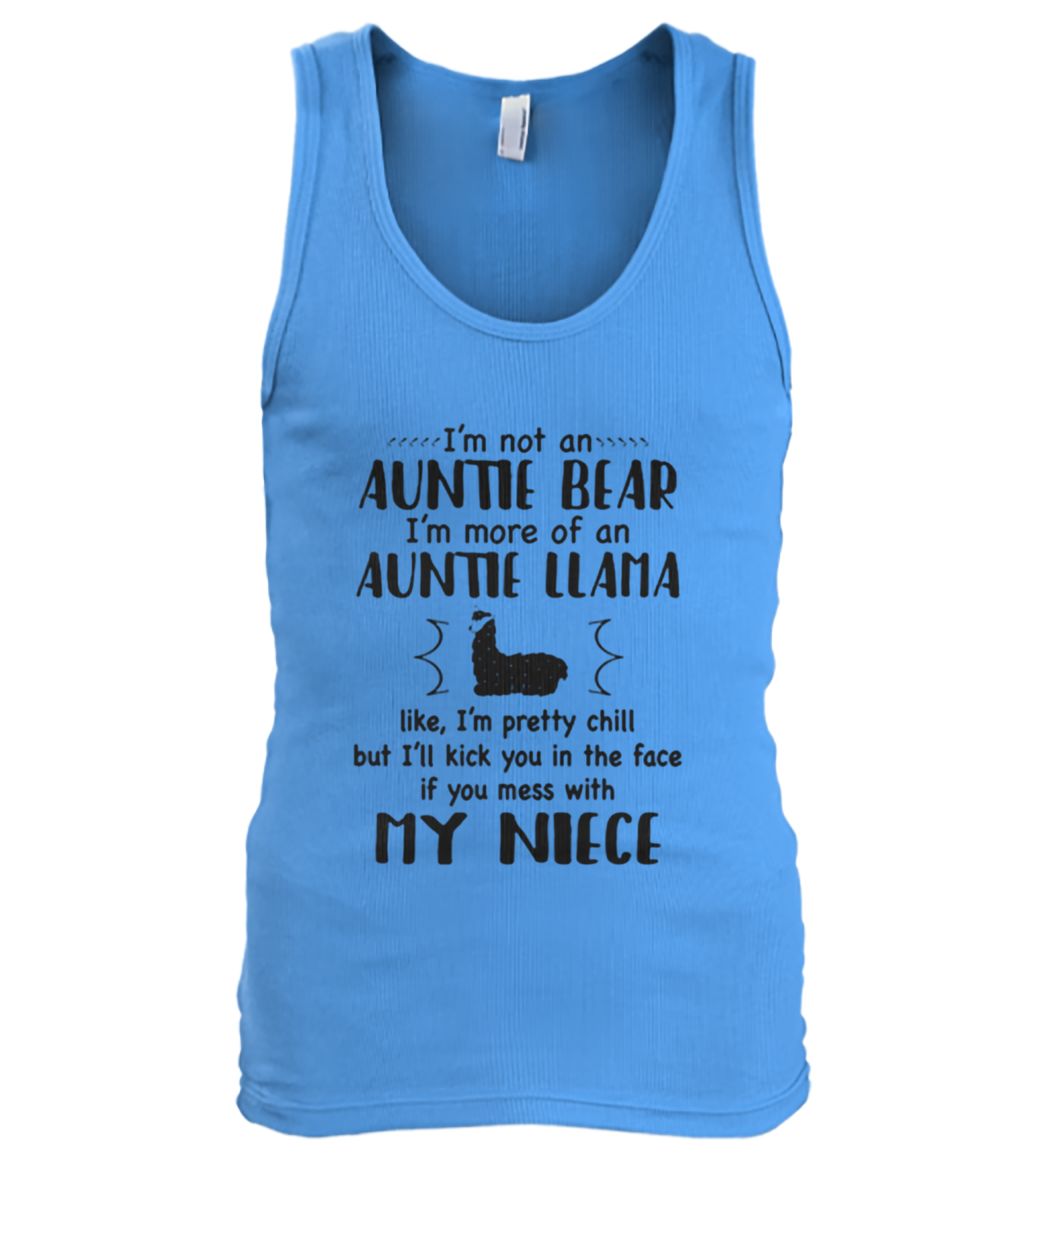 I'm not an auntie bear I'm more of an auntie llama men's tank top